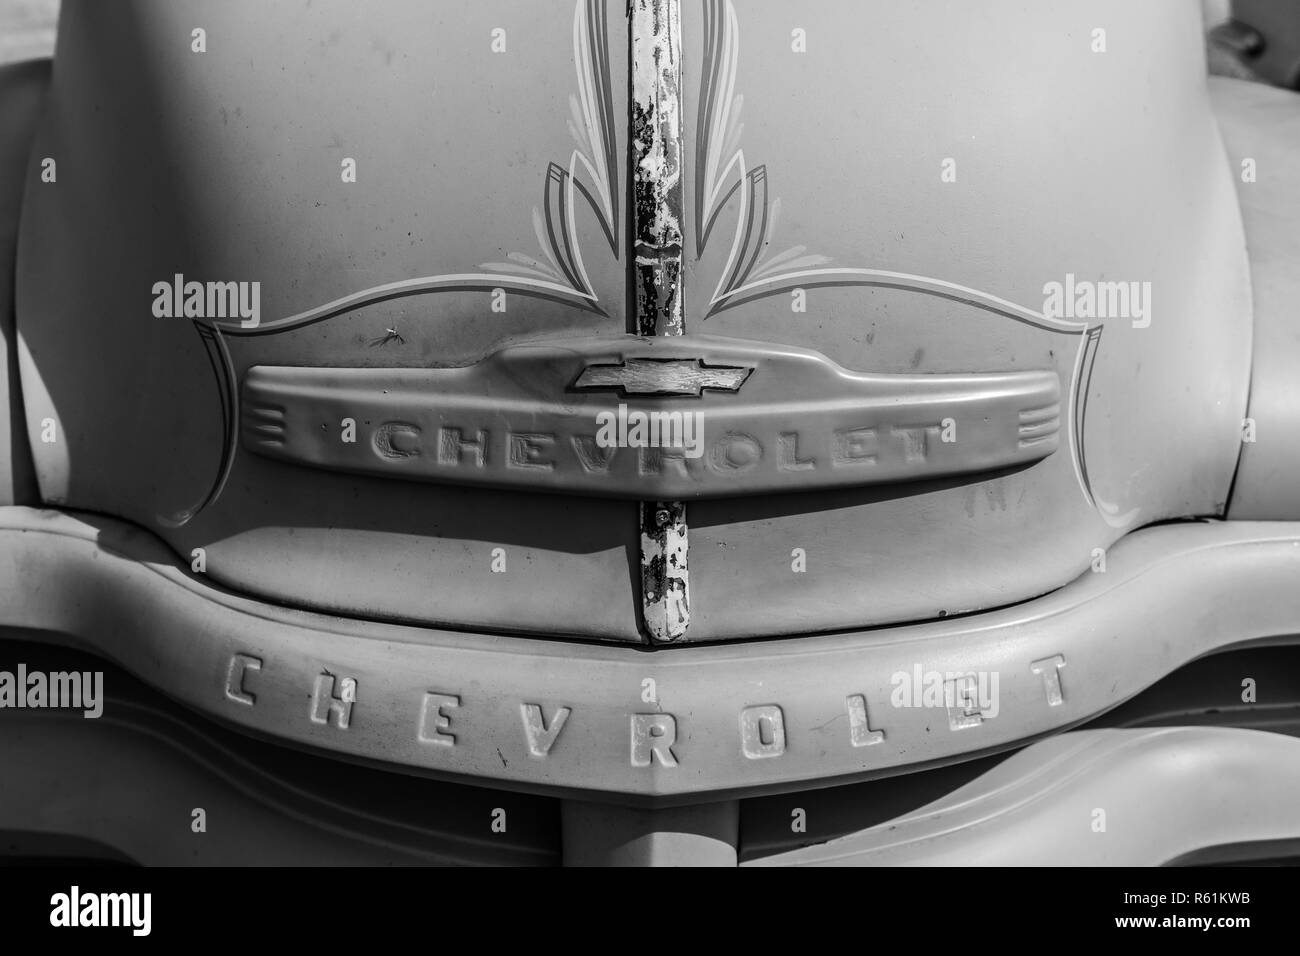 PAAREN IM GLIEN, GERMANY - MAY 19, 2018: Emblem of the pickup truck Chevrolet Advance Design C3100, 1949. Black and white. Die Oldtimer Show 2018. Stock Photo